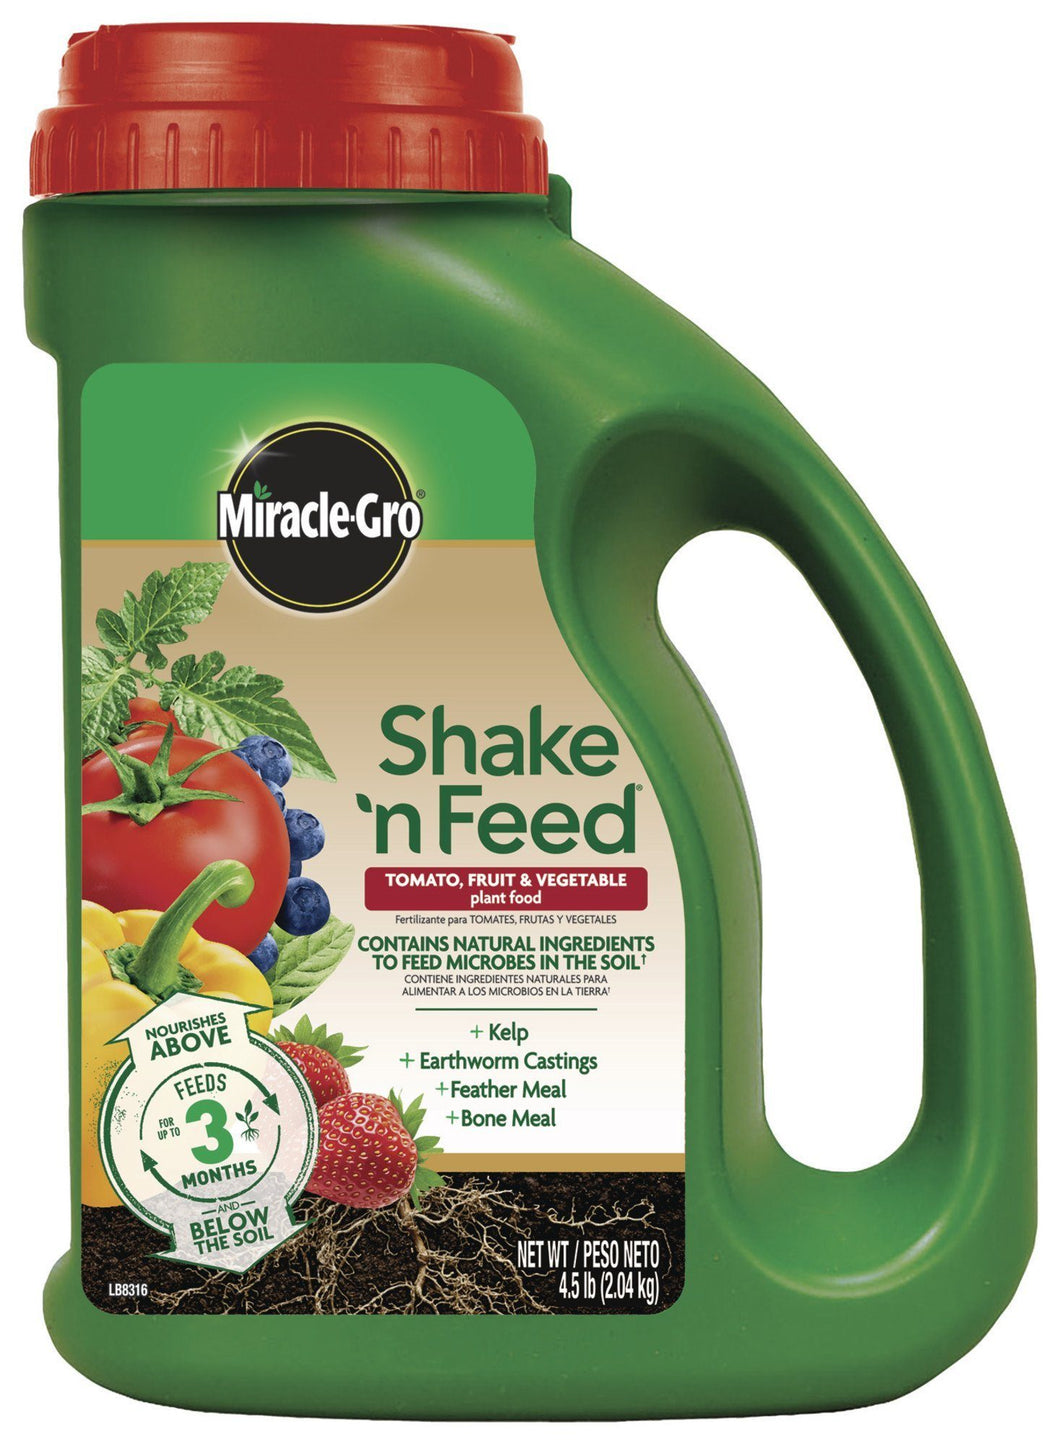 Miracle-Gro Continuous Release Plant Food Plus Calcium 3002610 Shake 'N Feed Tomato, Fruits and Vegetables Contin, 4.5 LB, Brown/A